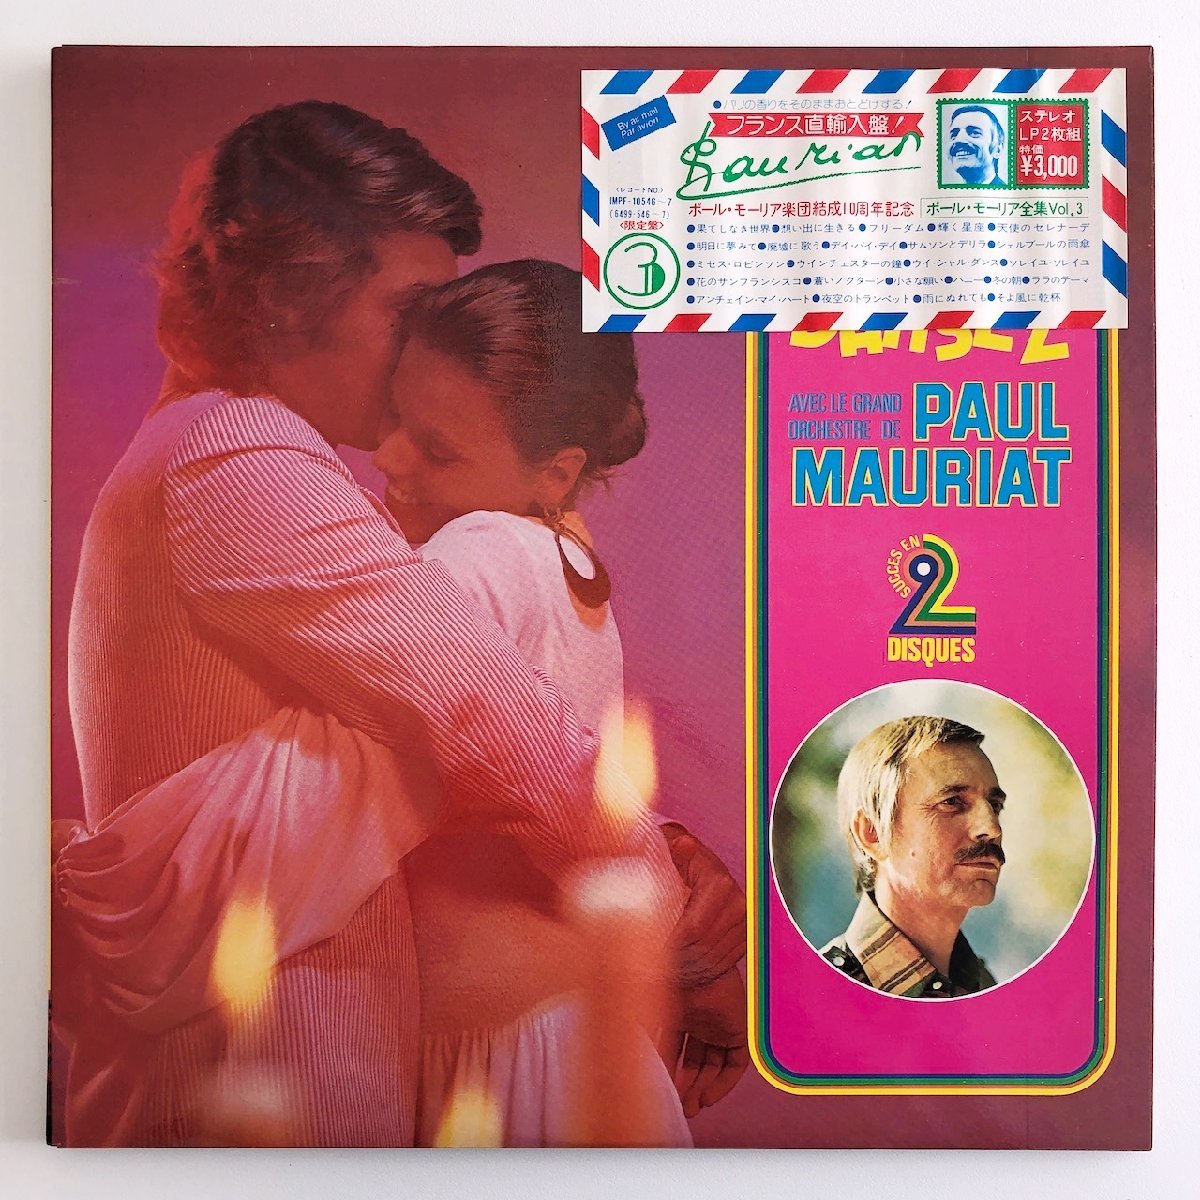 LP/ PAUL MAURIAT / DANCE TO 24 HITS-STEREO / ポール・モーリア / フランス盤 2枚組 直輸入 PHILIPS 6499546 31015の画像1